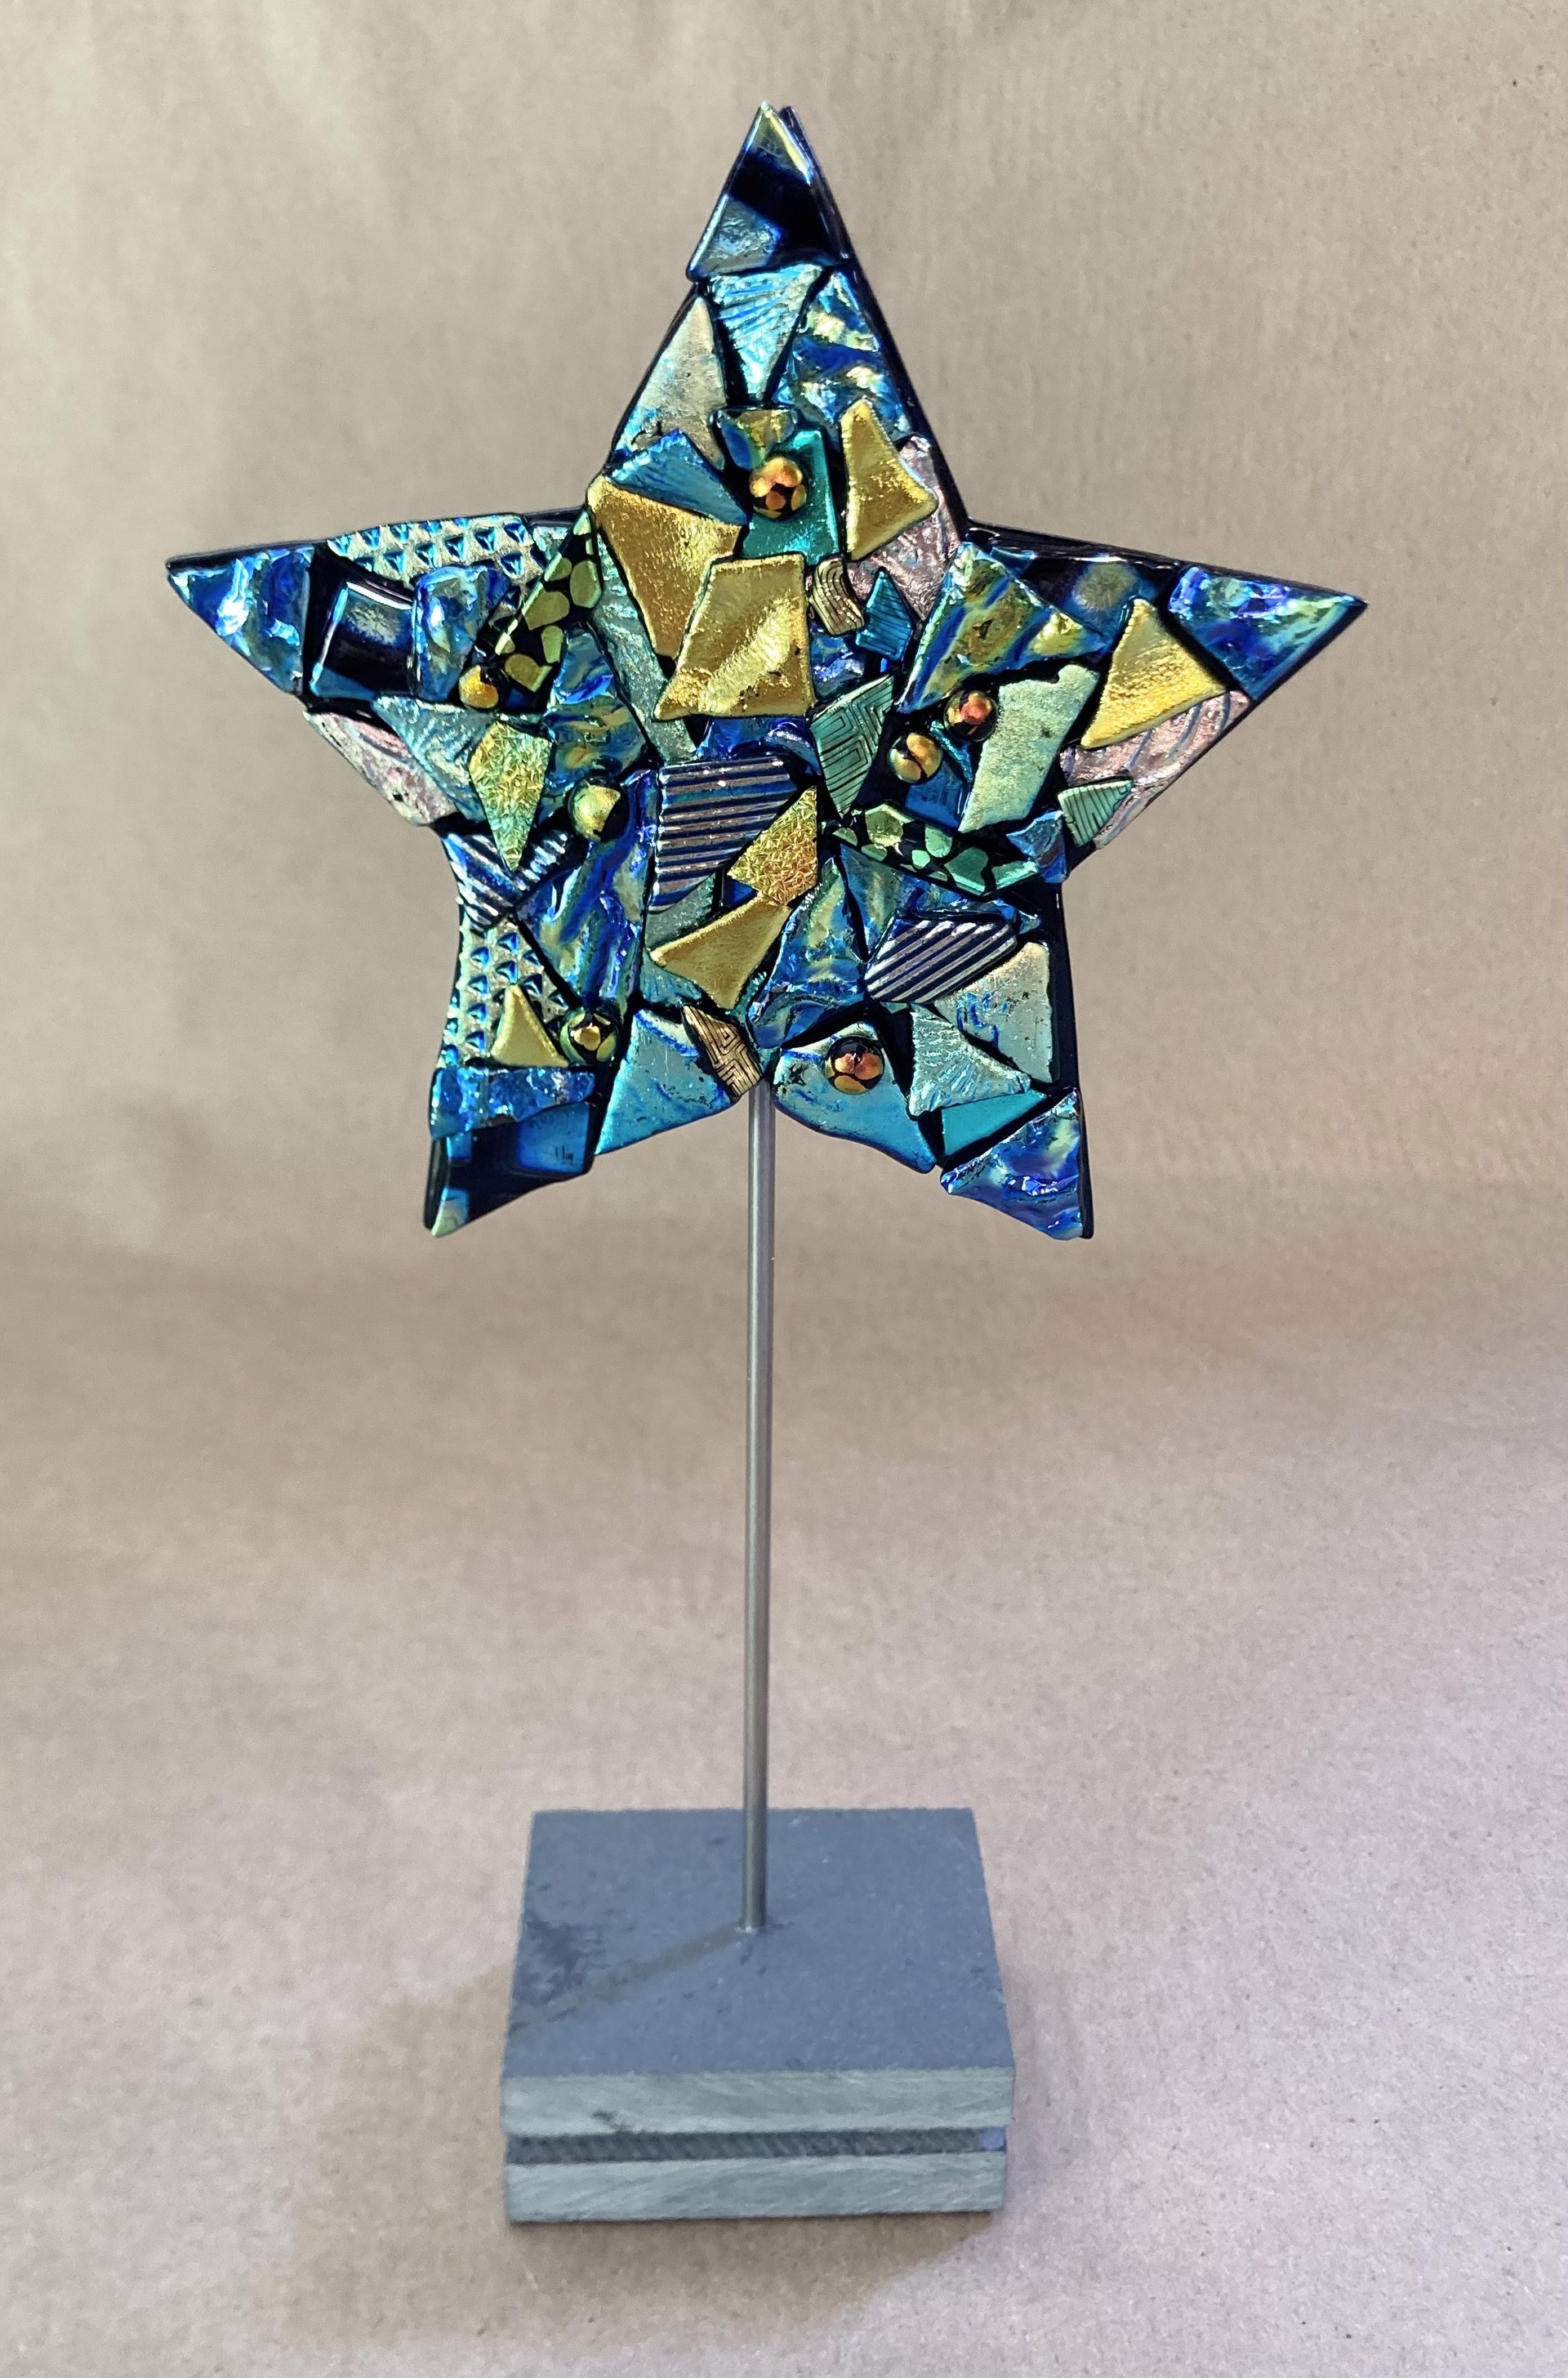 Star on Stand #5 by Doug and Barbara Henderson